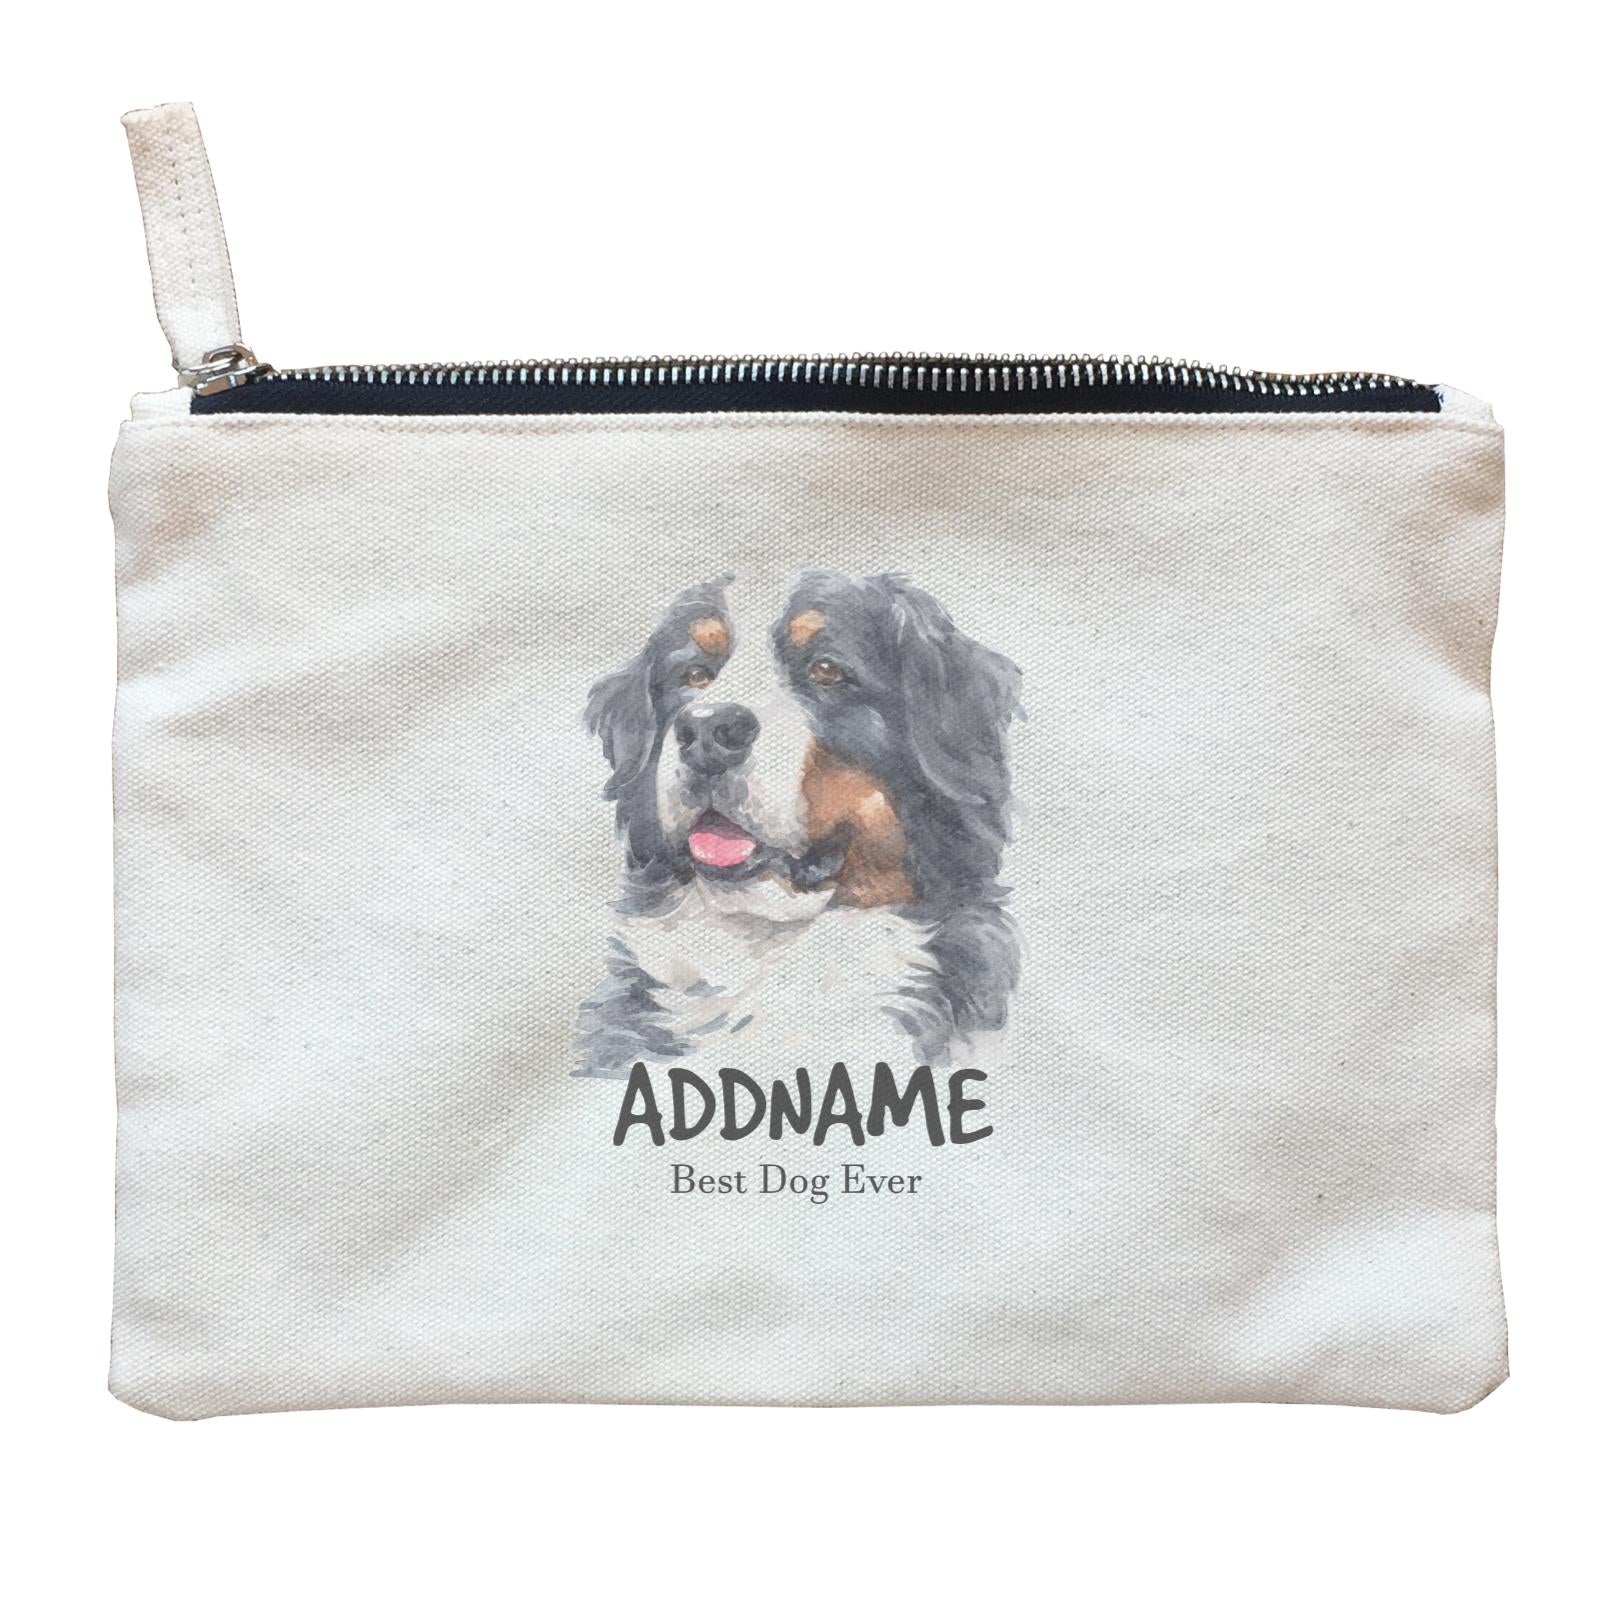 Watercolor Dog Bernese Mountain Best Dog Ever Addname Zipper Pouch